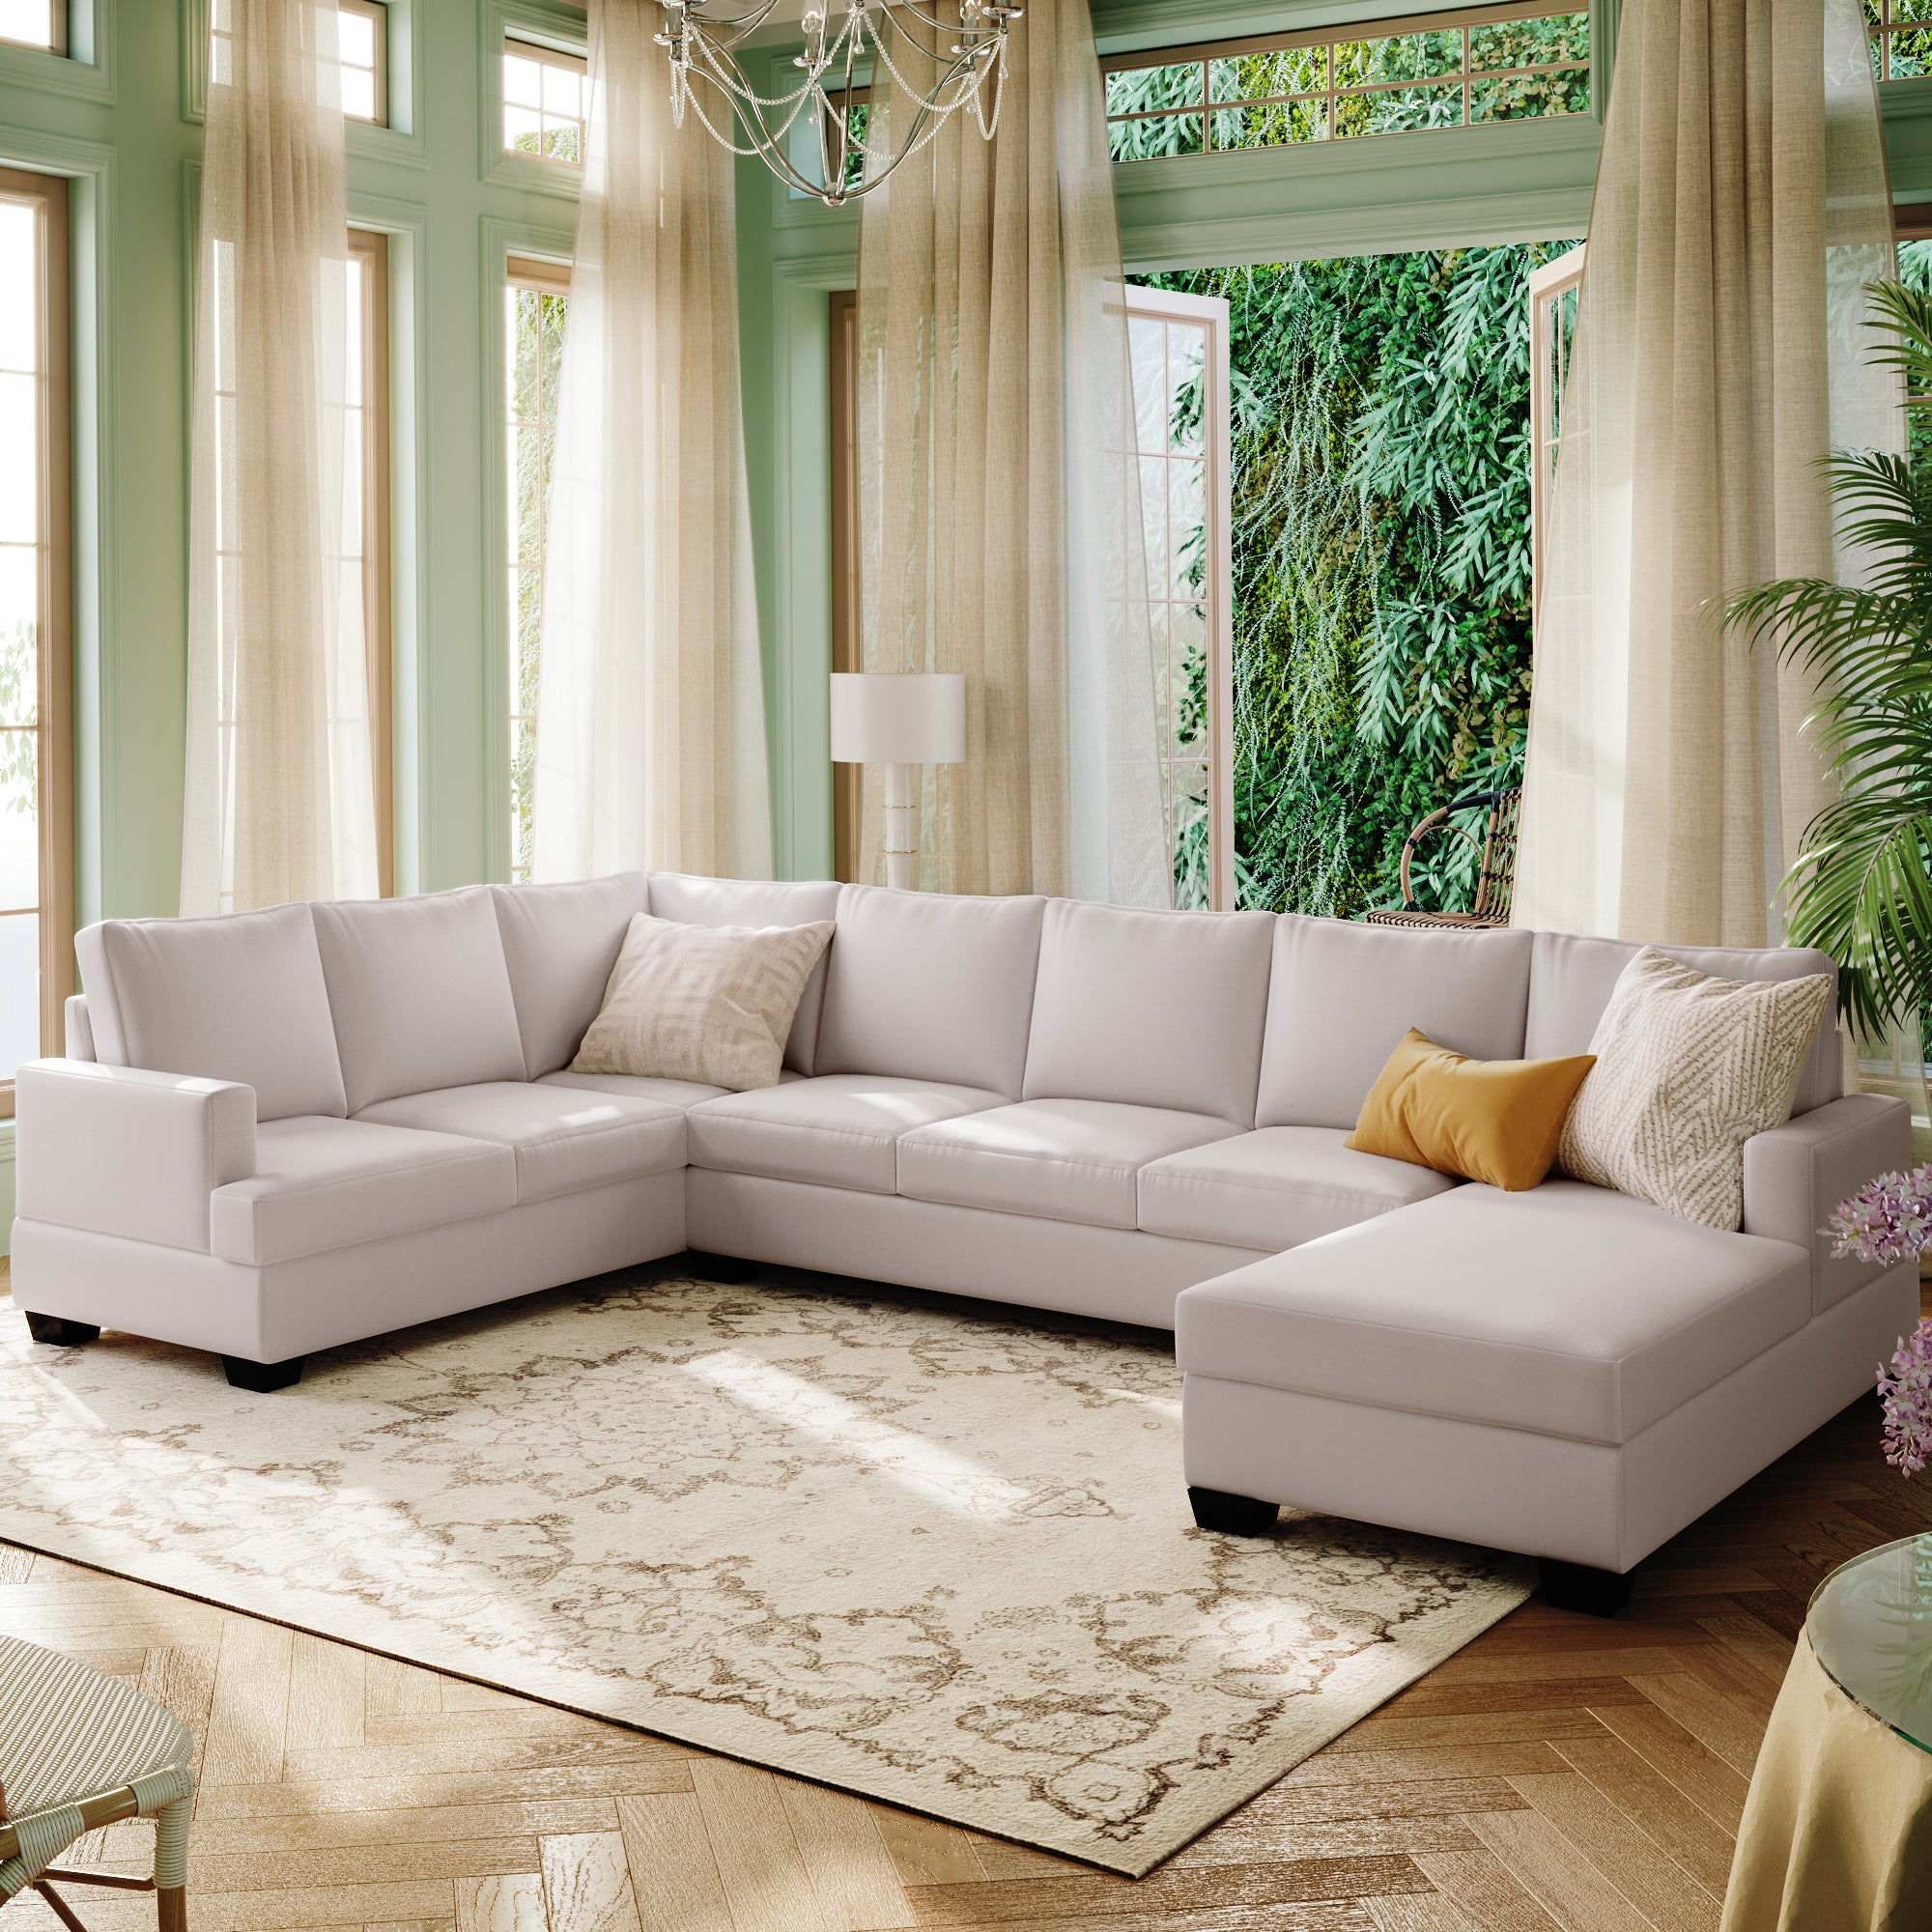 Modern Large Upholstered U-Shape Sectional: Extra Wide Chaise, Beige